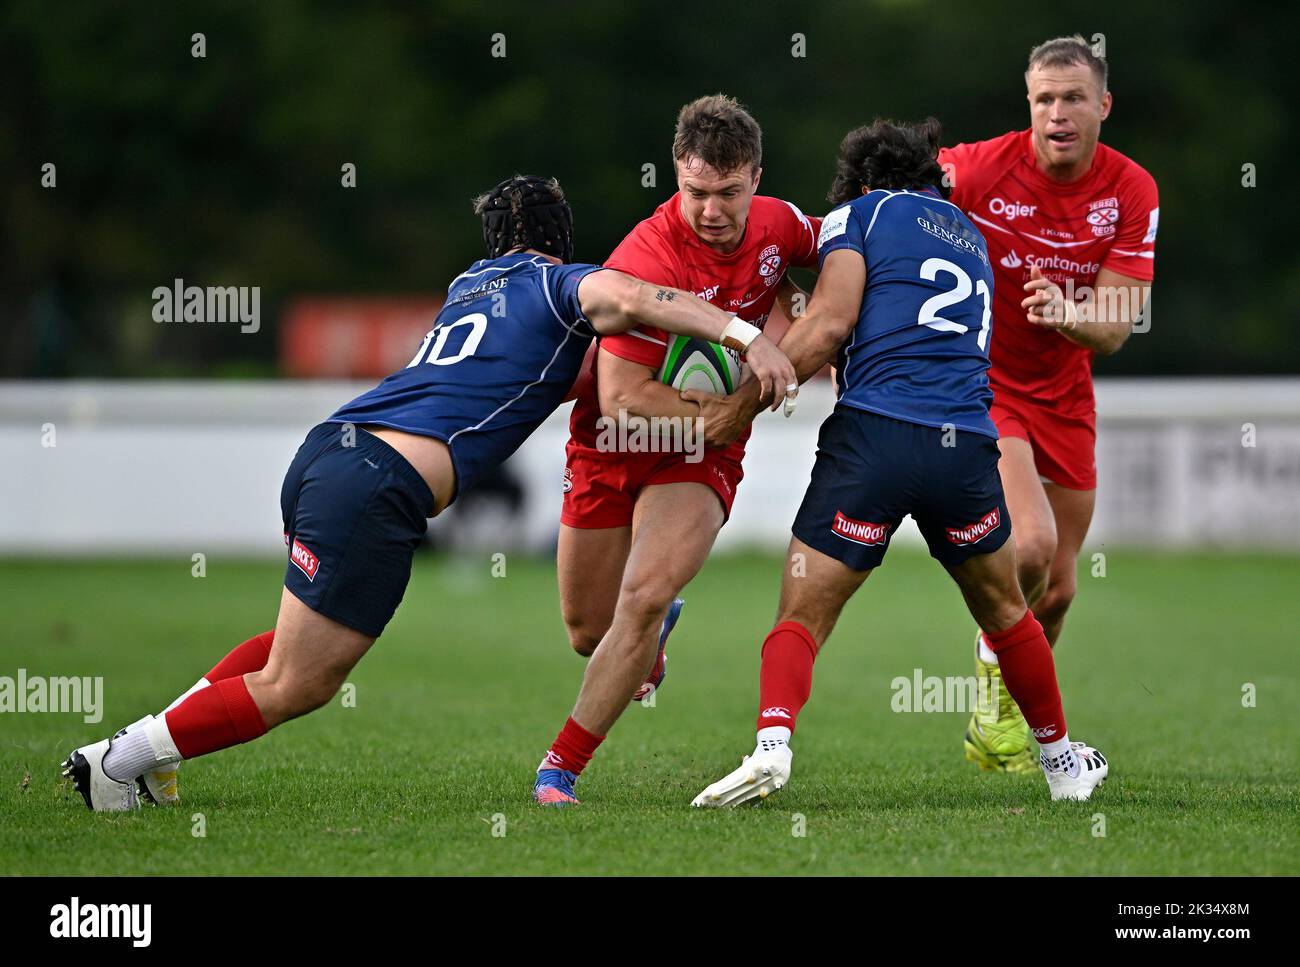 Richmond, United Kingdom. 24th Sep, 2022. Championship Rugby. London Scottish V Jersey Reds. The Richmond Athletic Ground. Richmond. Charlie Powell (Jersey Reds) is tackled by Luca Petrozzi (London Scottish, 21) and Harry Sheppard (London Scottish) during the London Scottish V Jersey Reds championship rugby match. Credit: Sport In Pictures/Alamy Live News Stock Photo